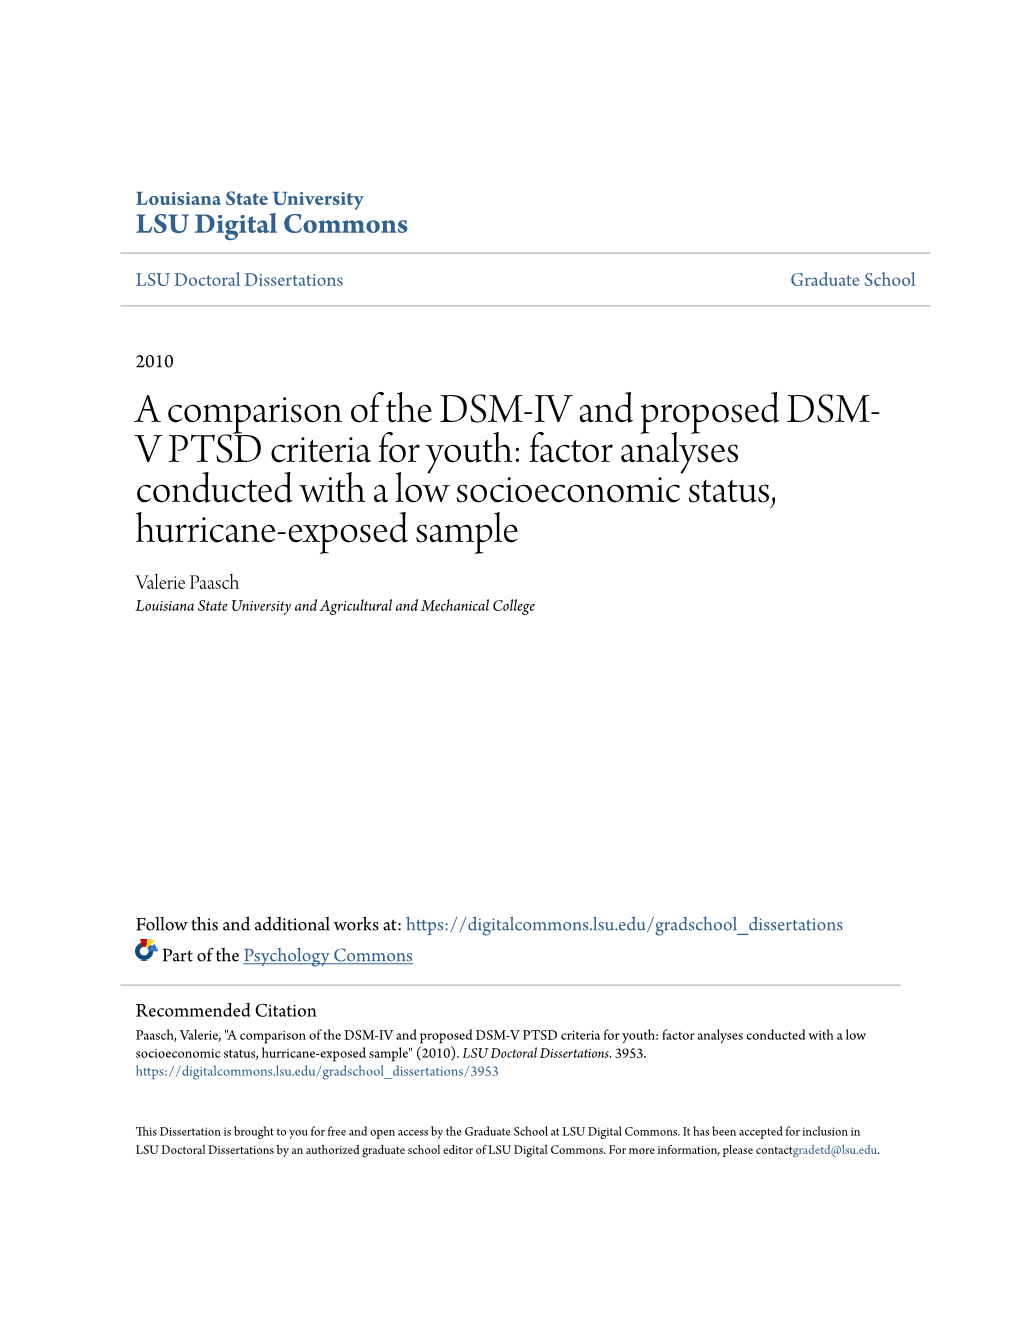 A Comparison of the DSM-IV and Proposed